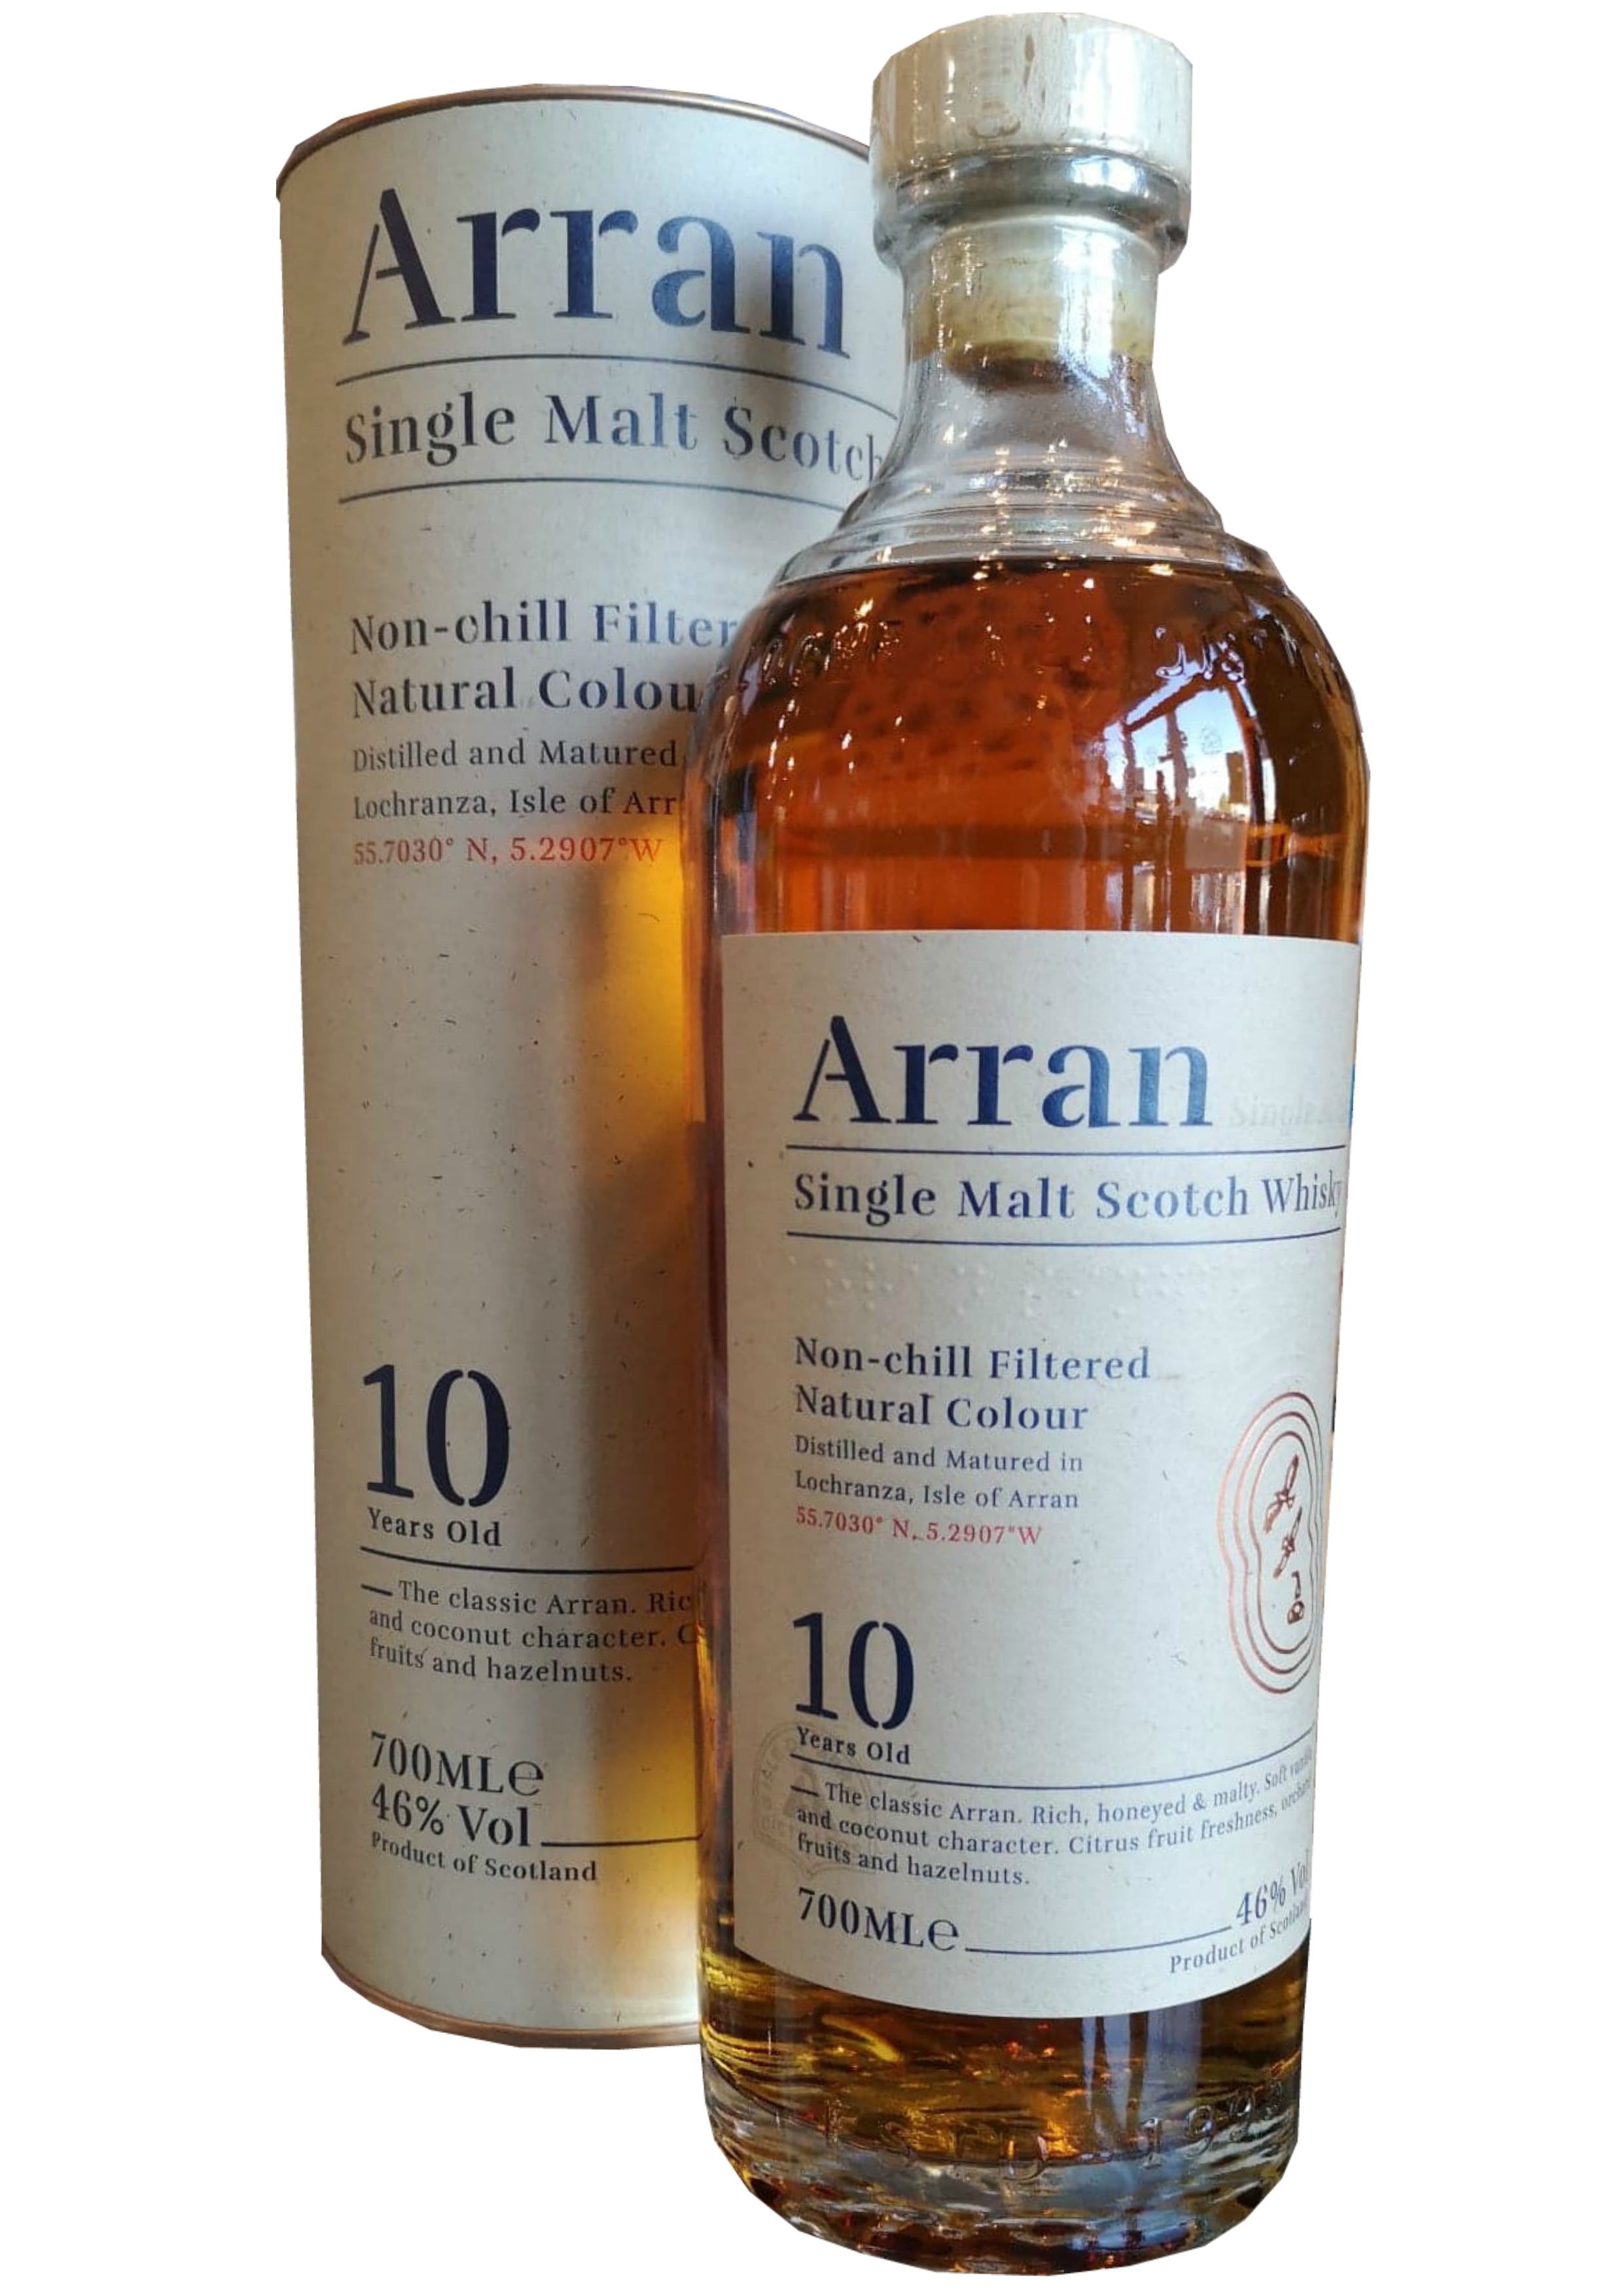 Year 10 Old Whisky Arran Shop 70cl — Inverurie